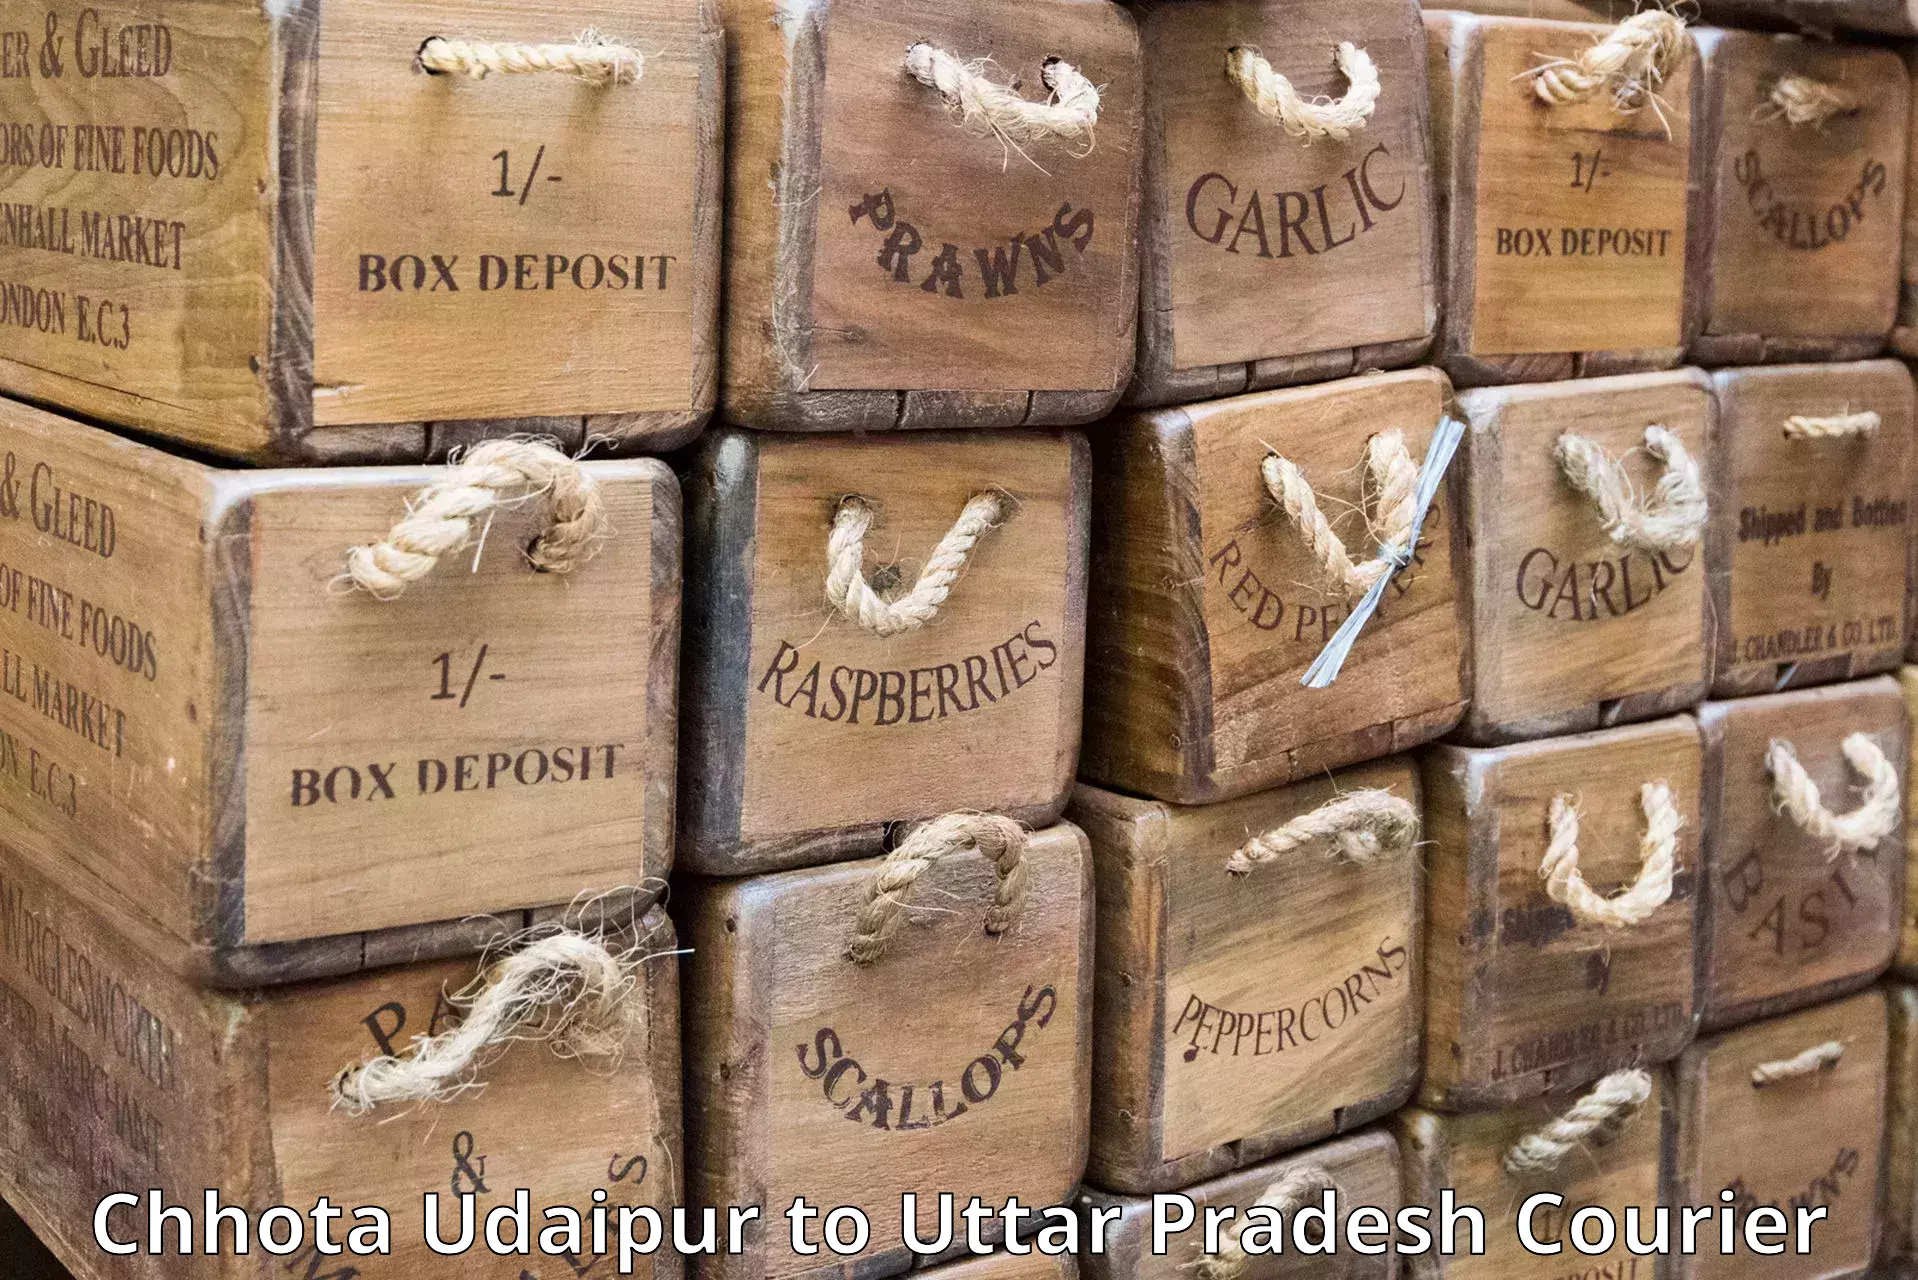 Online package tracking Chhota Udaipur to Utraula